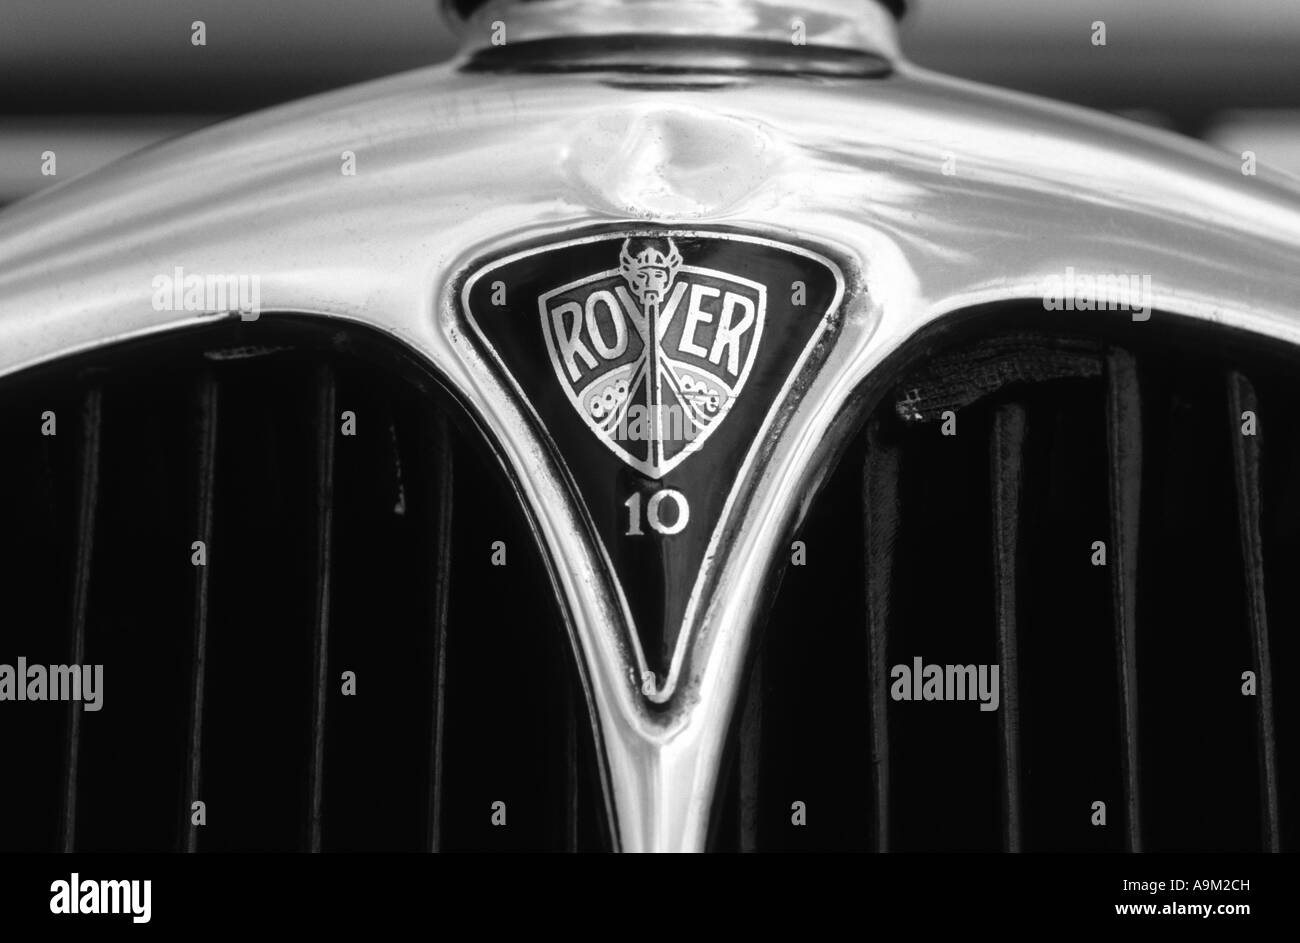 Rover 10 of 1934. English car manufacturer 1904 on. Rover car auto badge marque British maker motif Stock Photo